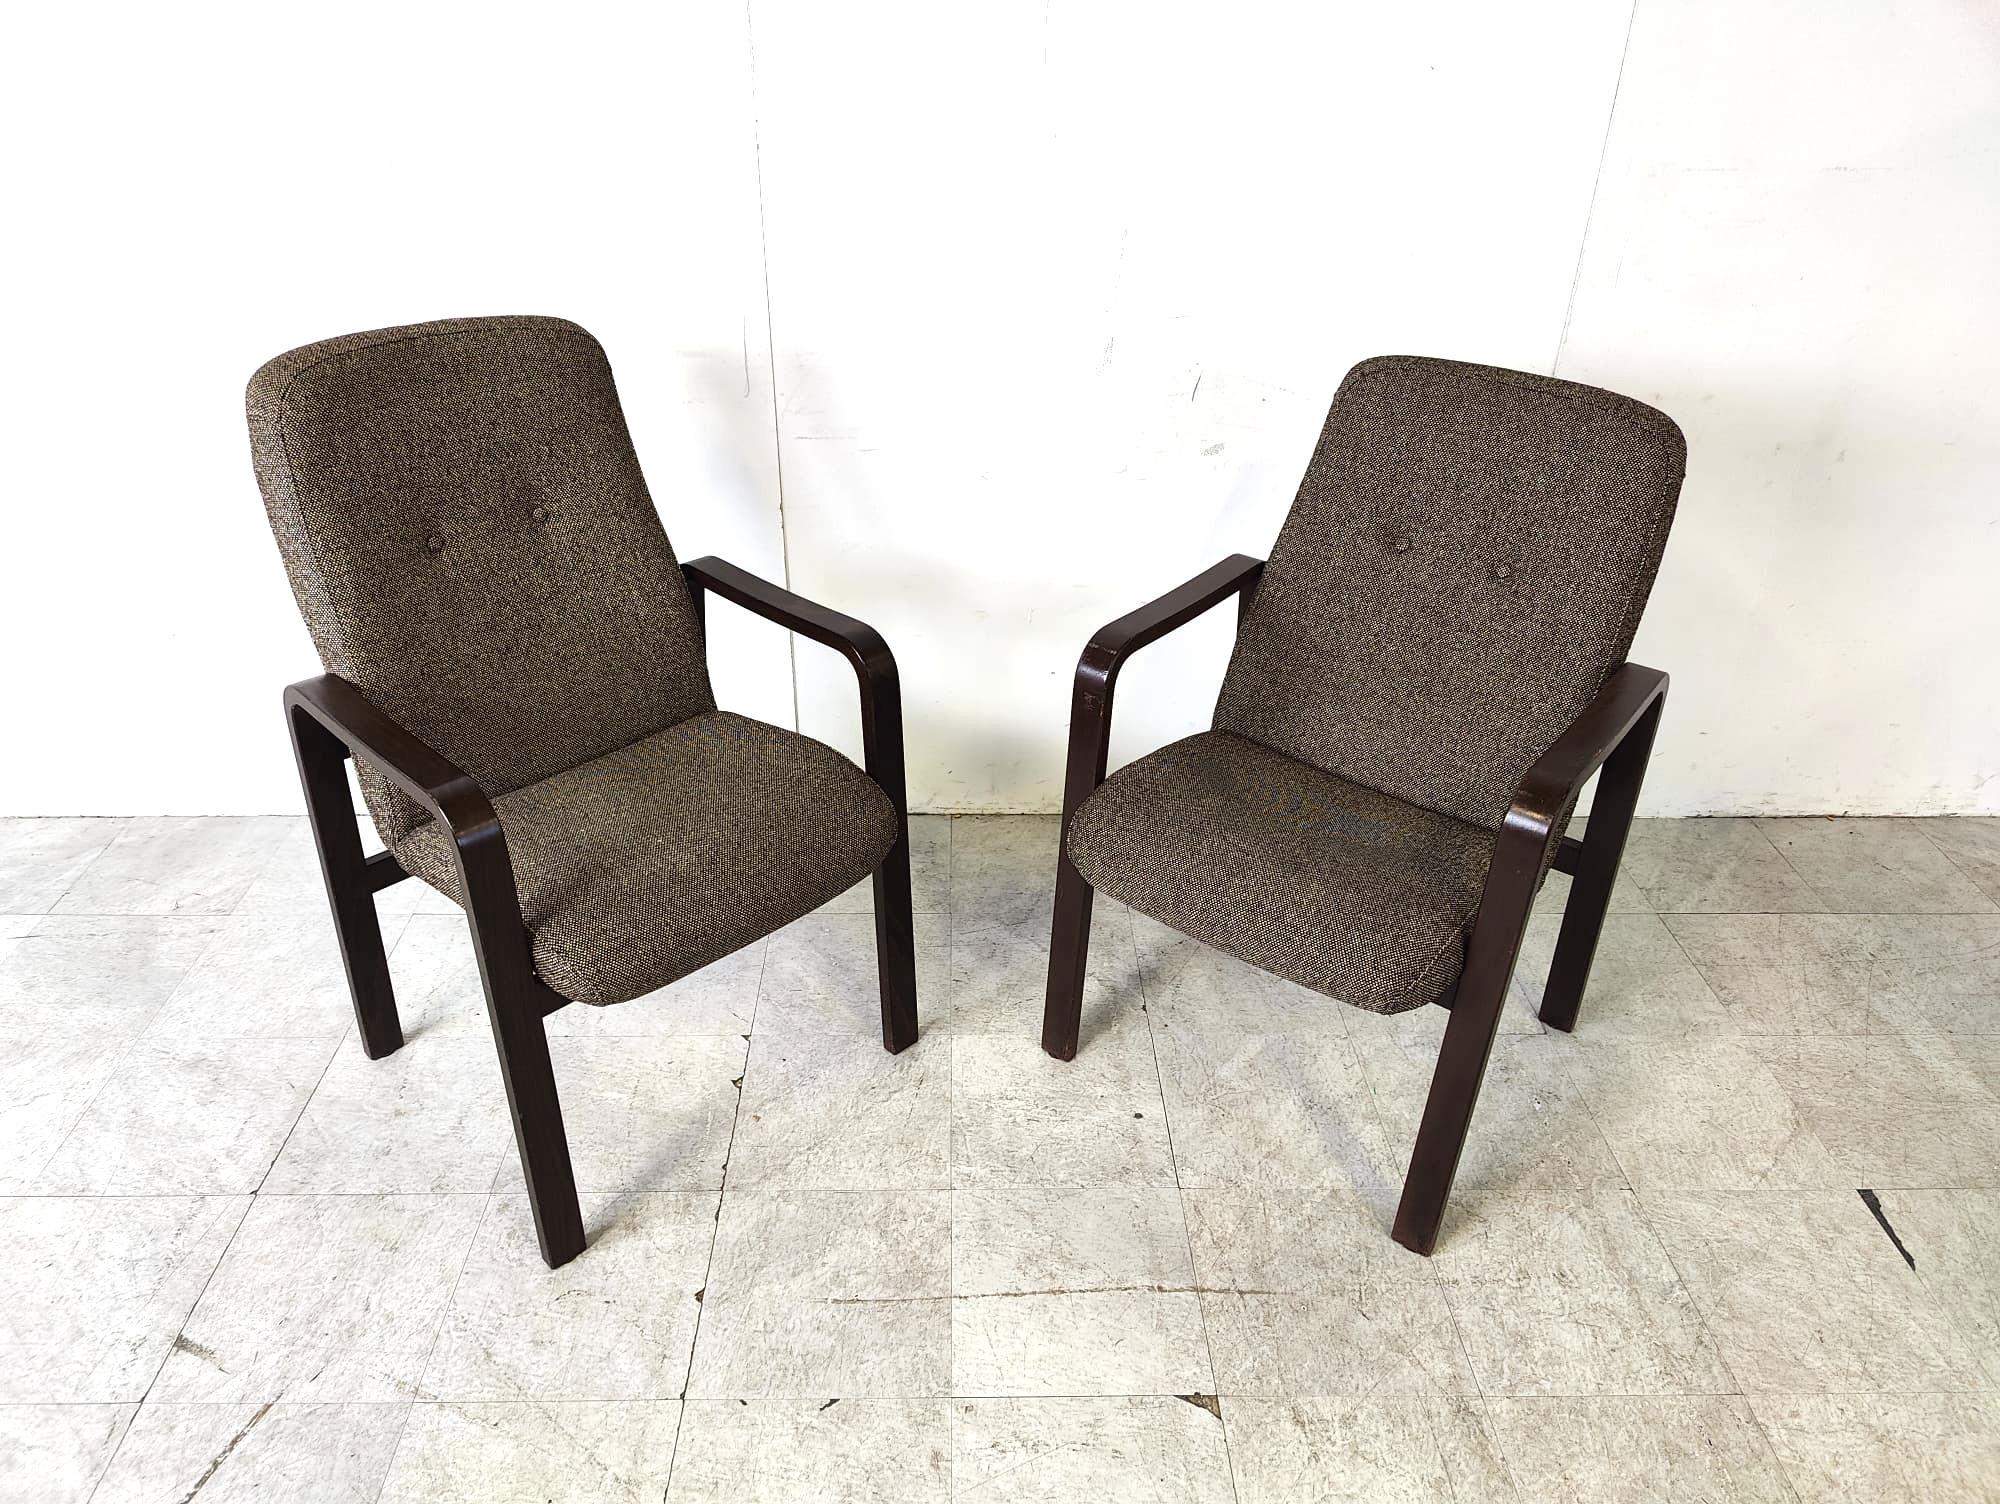 Vintage bentwood armchairs, 1970s For Sale 1